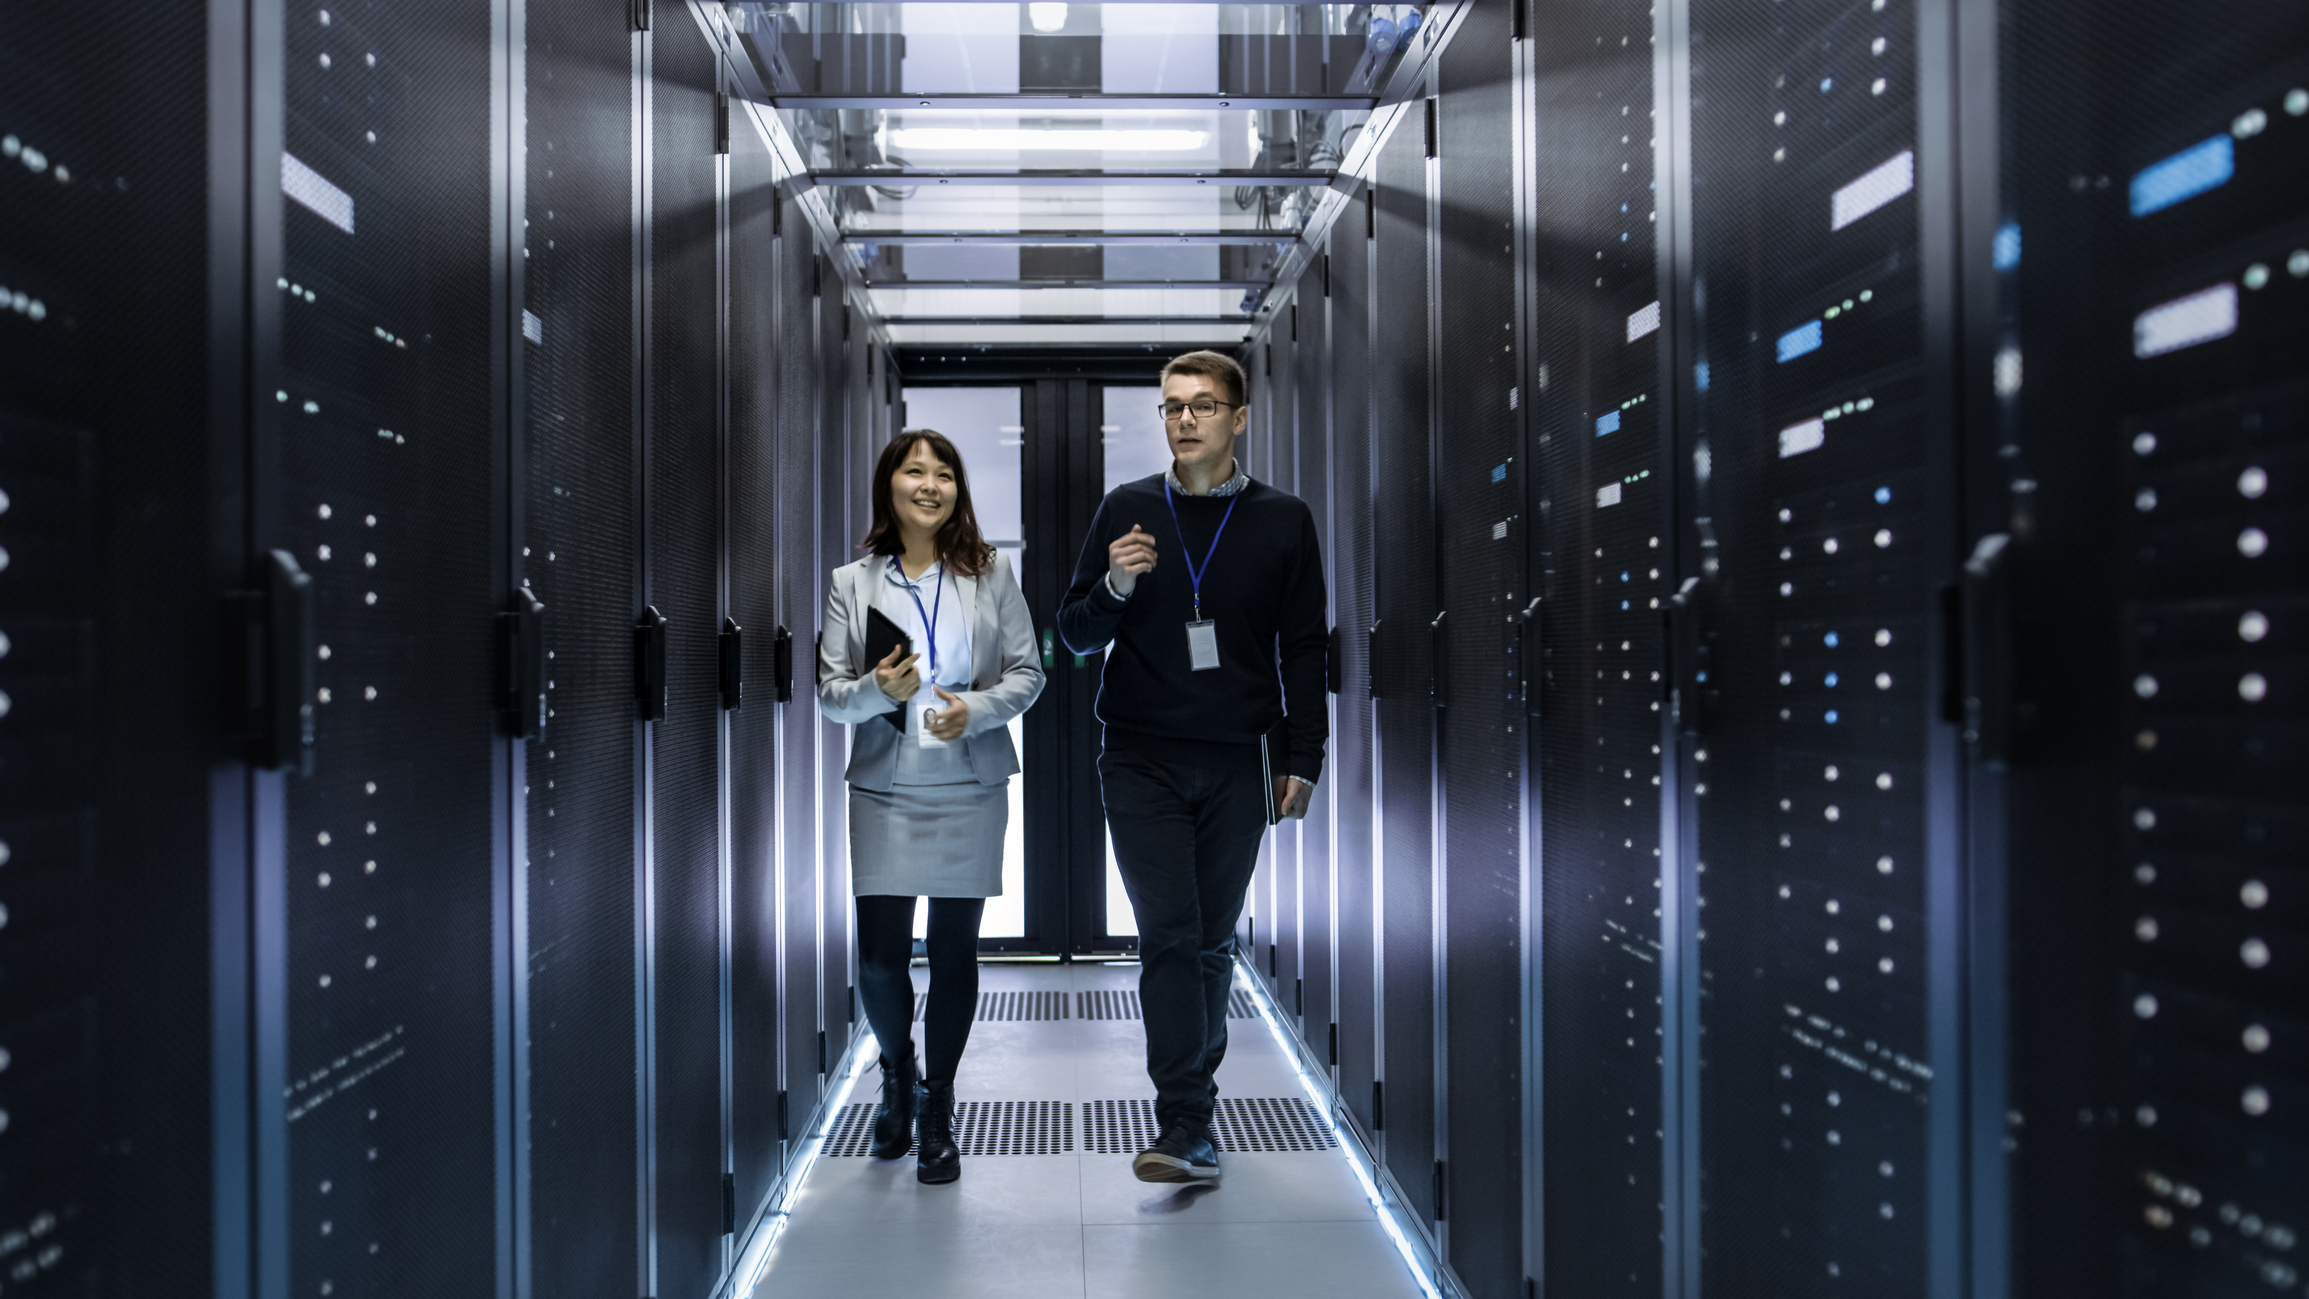 Caucasian Male And Asian Female It Technicians Walking Through Corridor Of Data Center With Rows Of Rack Servers. They Have Discussion, She Holds Tablet Computer.